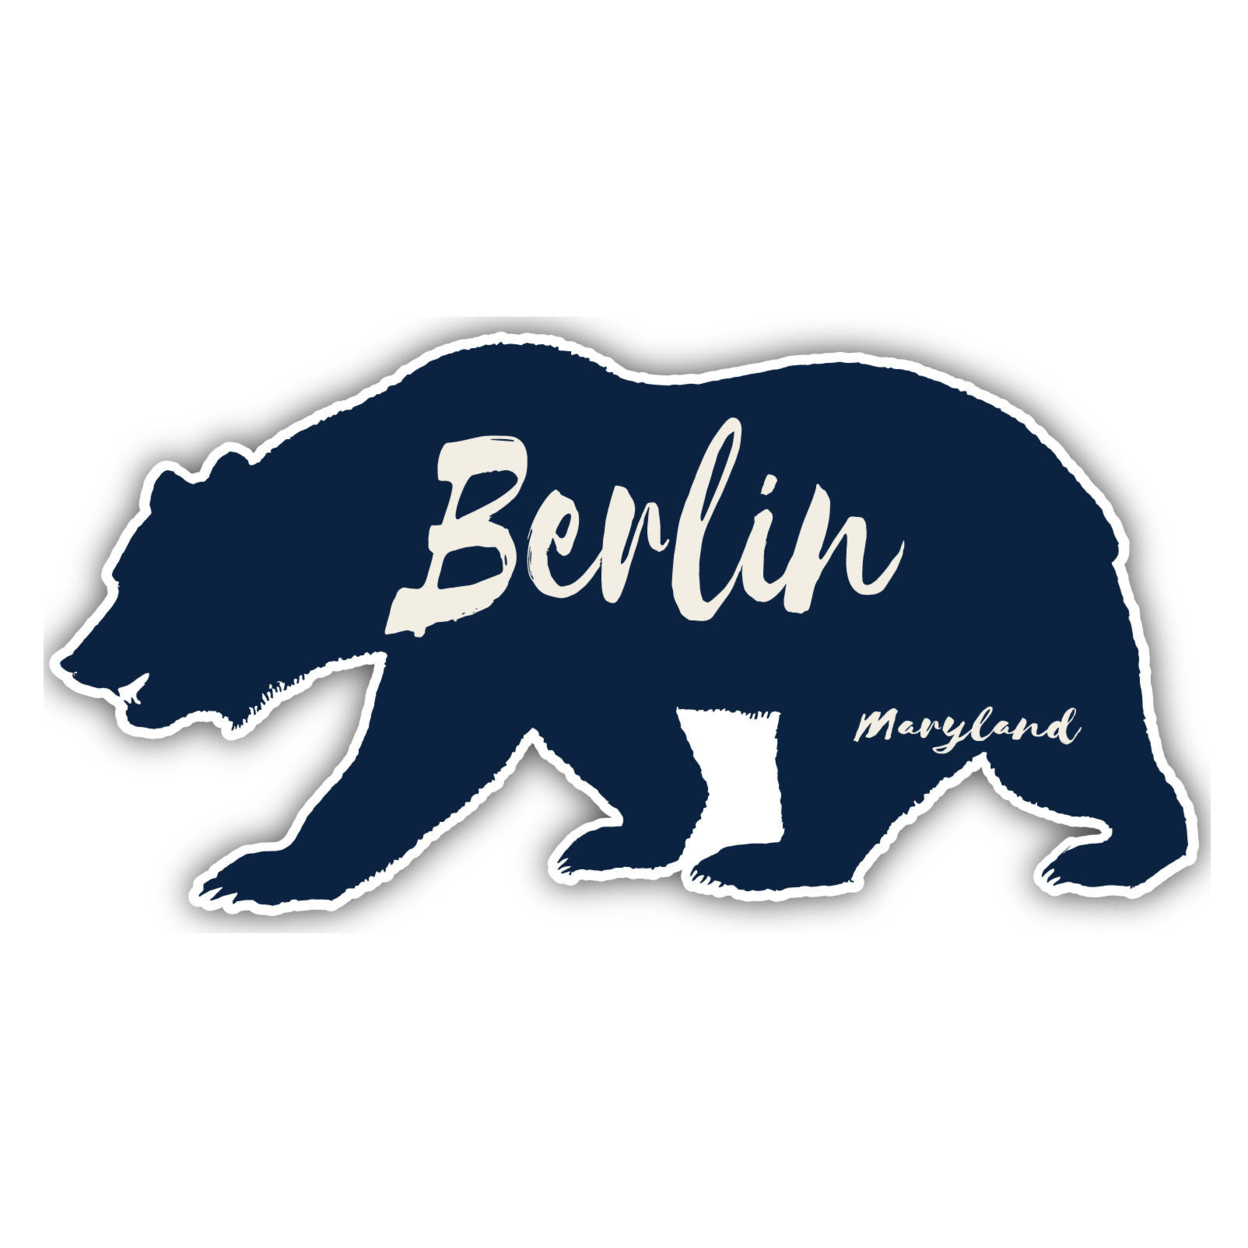 Berlin Maryland Souvenir Decorative Stickers (Choose Theme And Size) - 4-Pack, 4-Inch, Bear